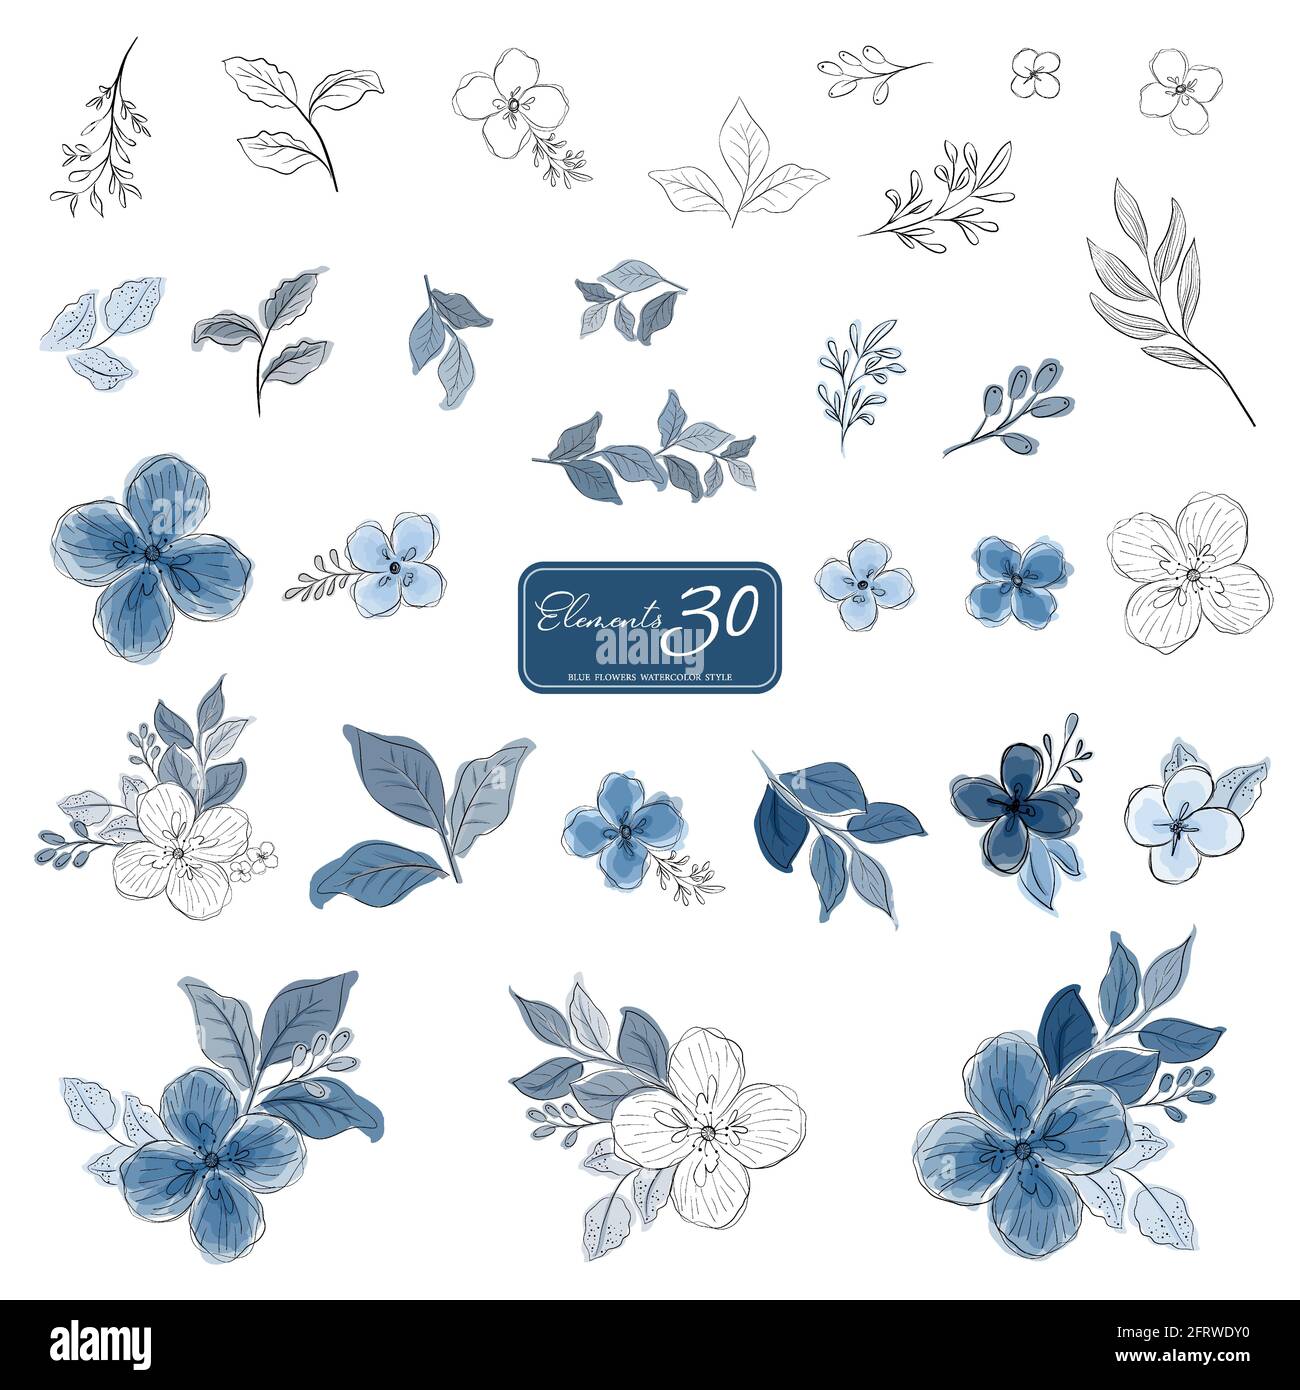 Set of blue flowers and leaves watercolor style elements. Illustrations hand-drawn isolated on a white background. Stock Vector